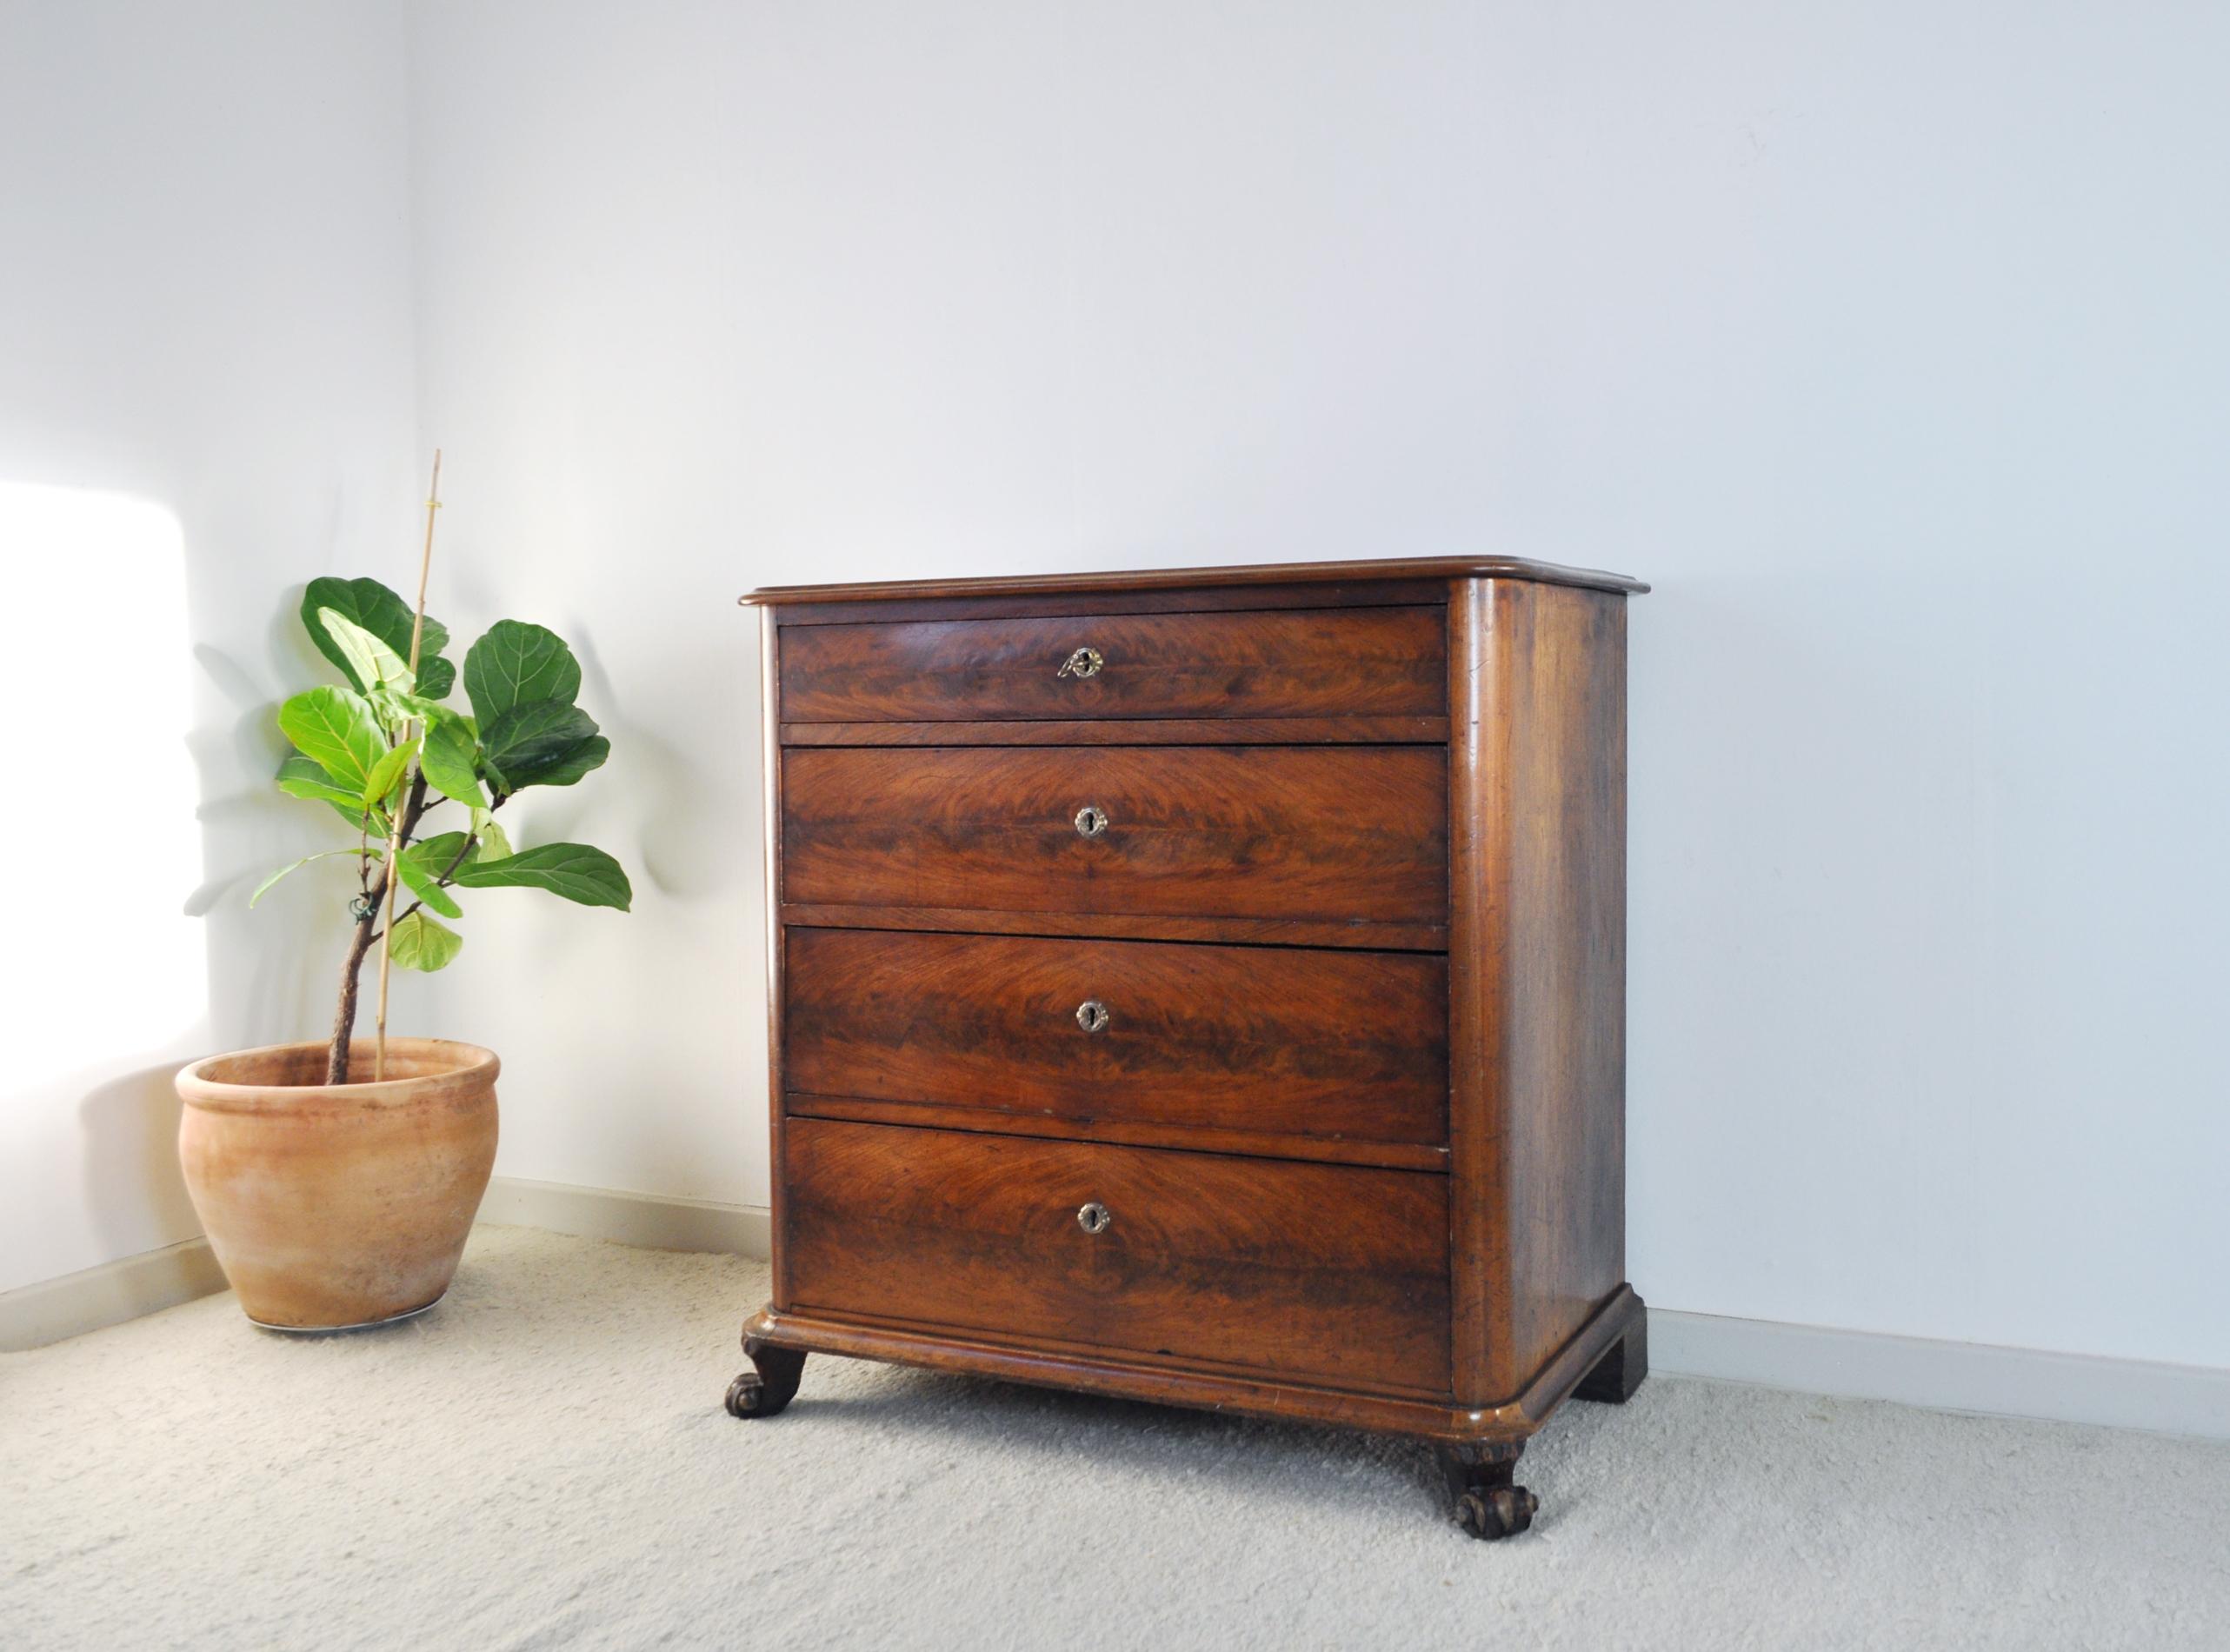 Neoclassical 19th Century Danish Walnut Commode or Chest of Drawers Featuring Lions Paw Feet